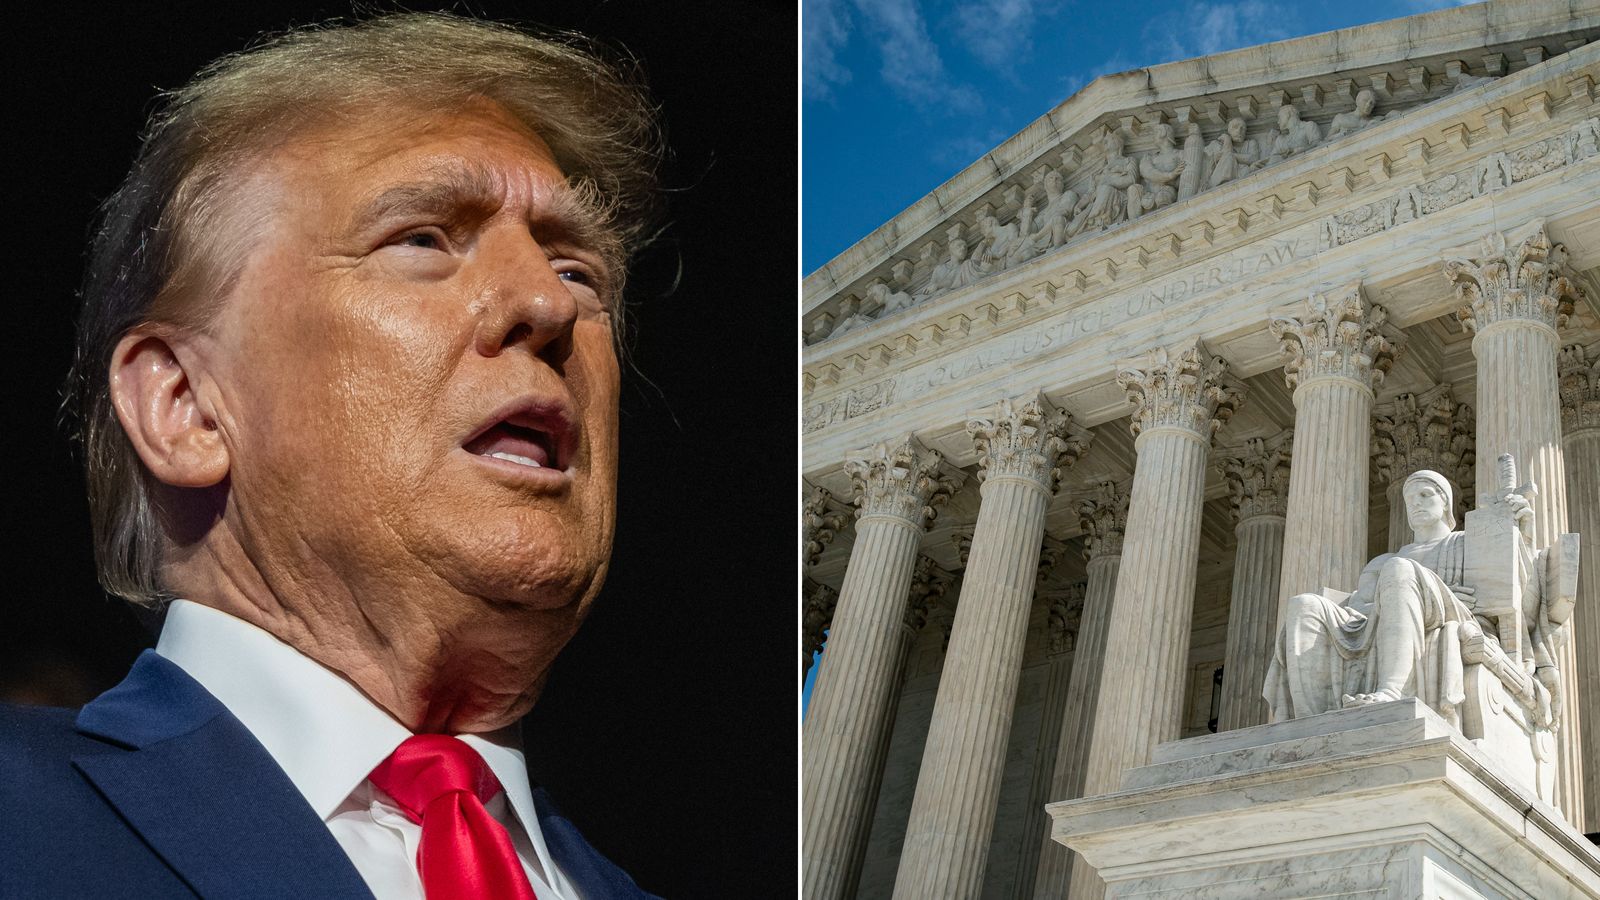 How social media reacted to Donald Trump's monumental day in court